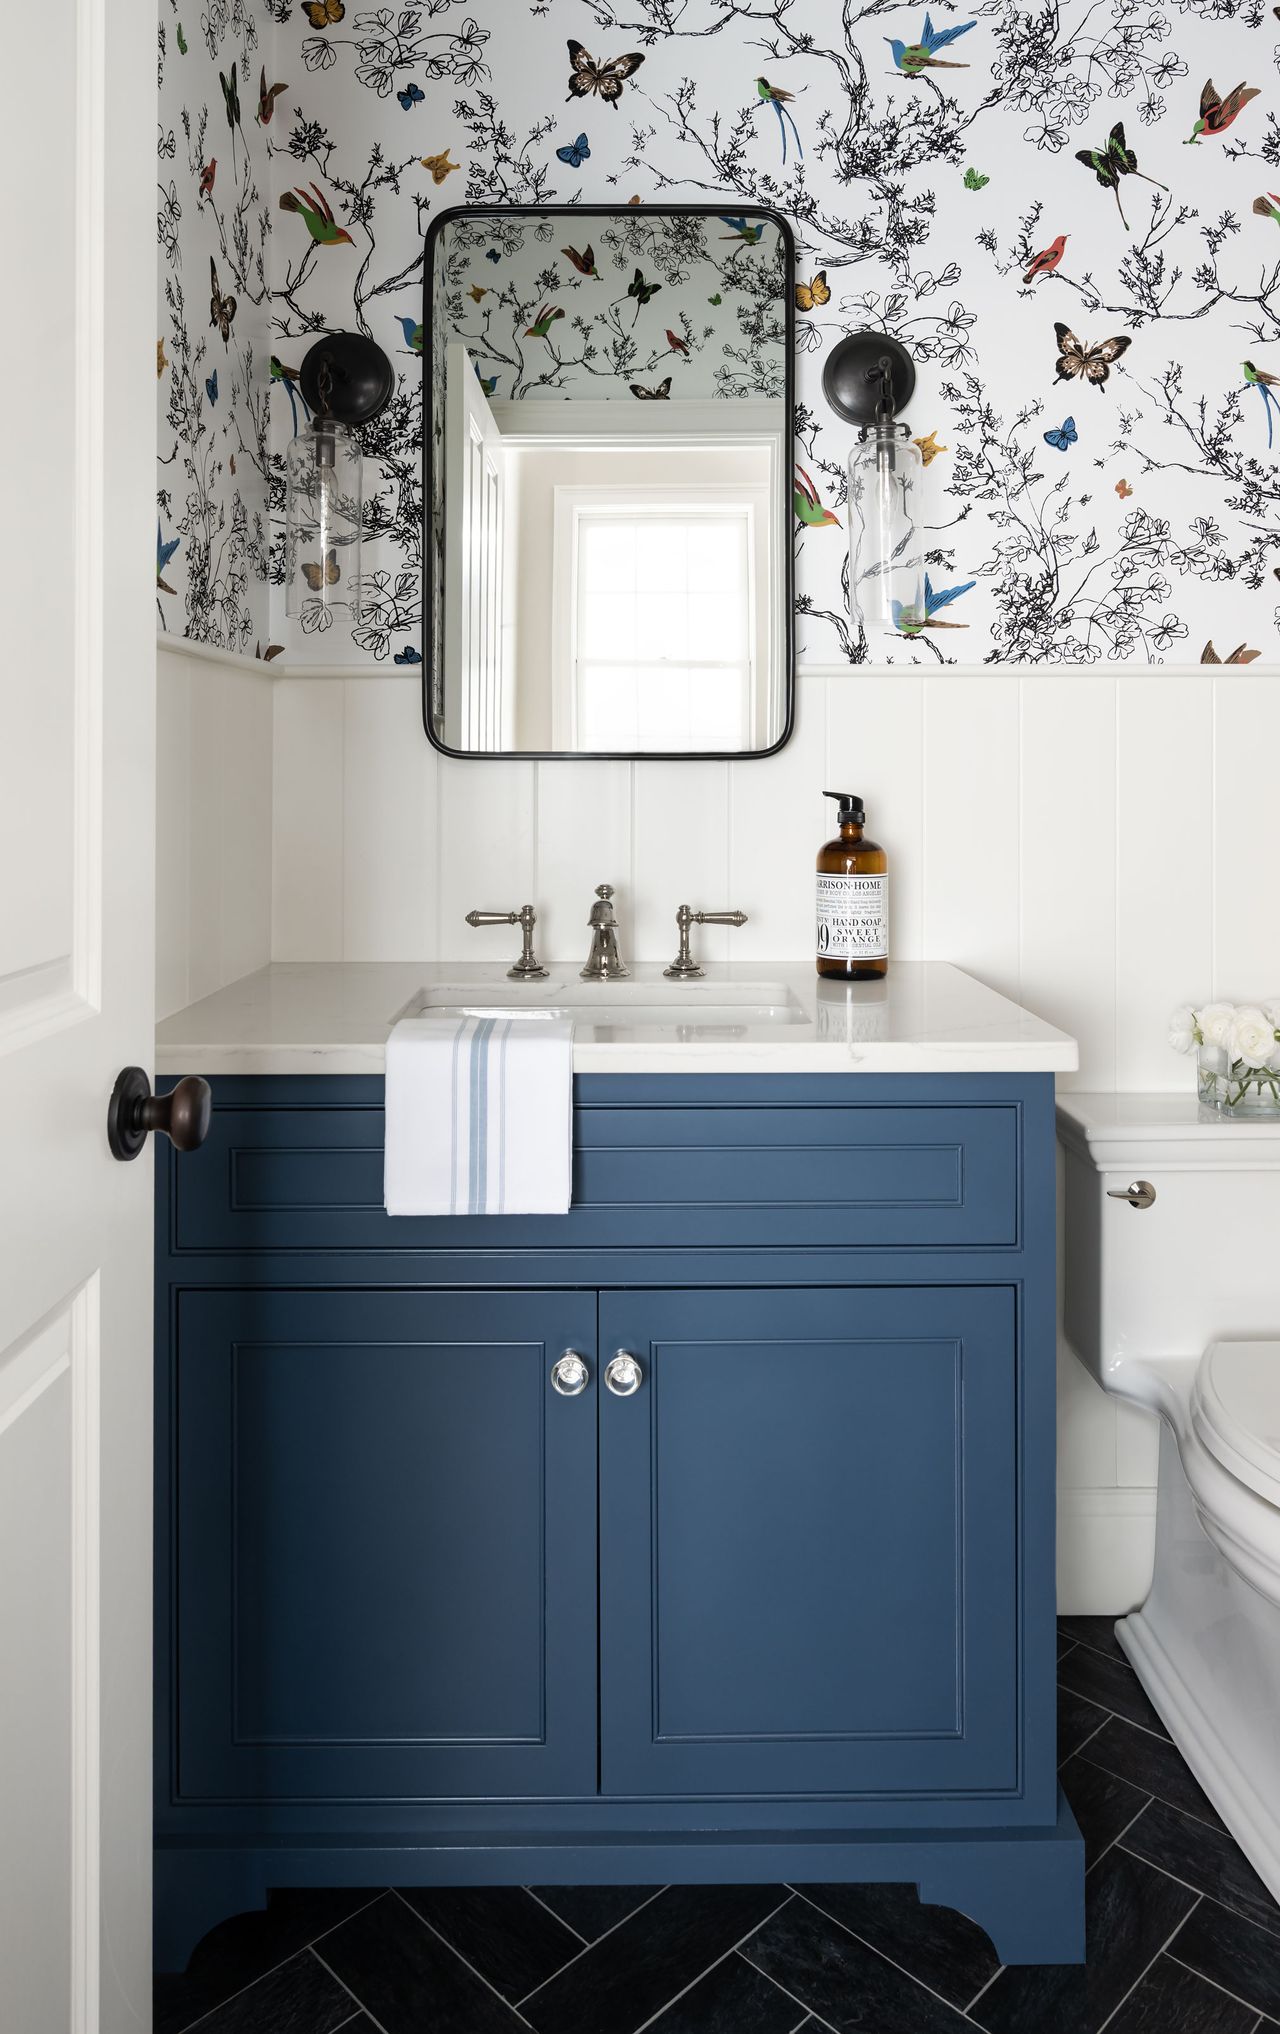 Powder room vanity ideas: 10 design rules for this small space